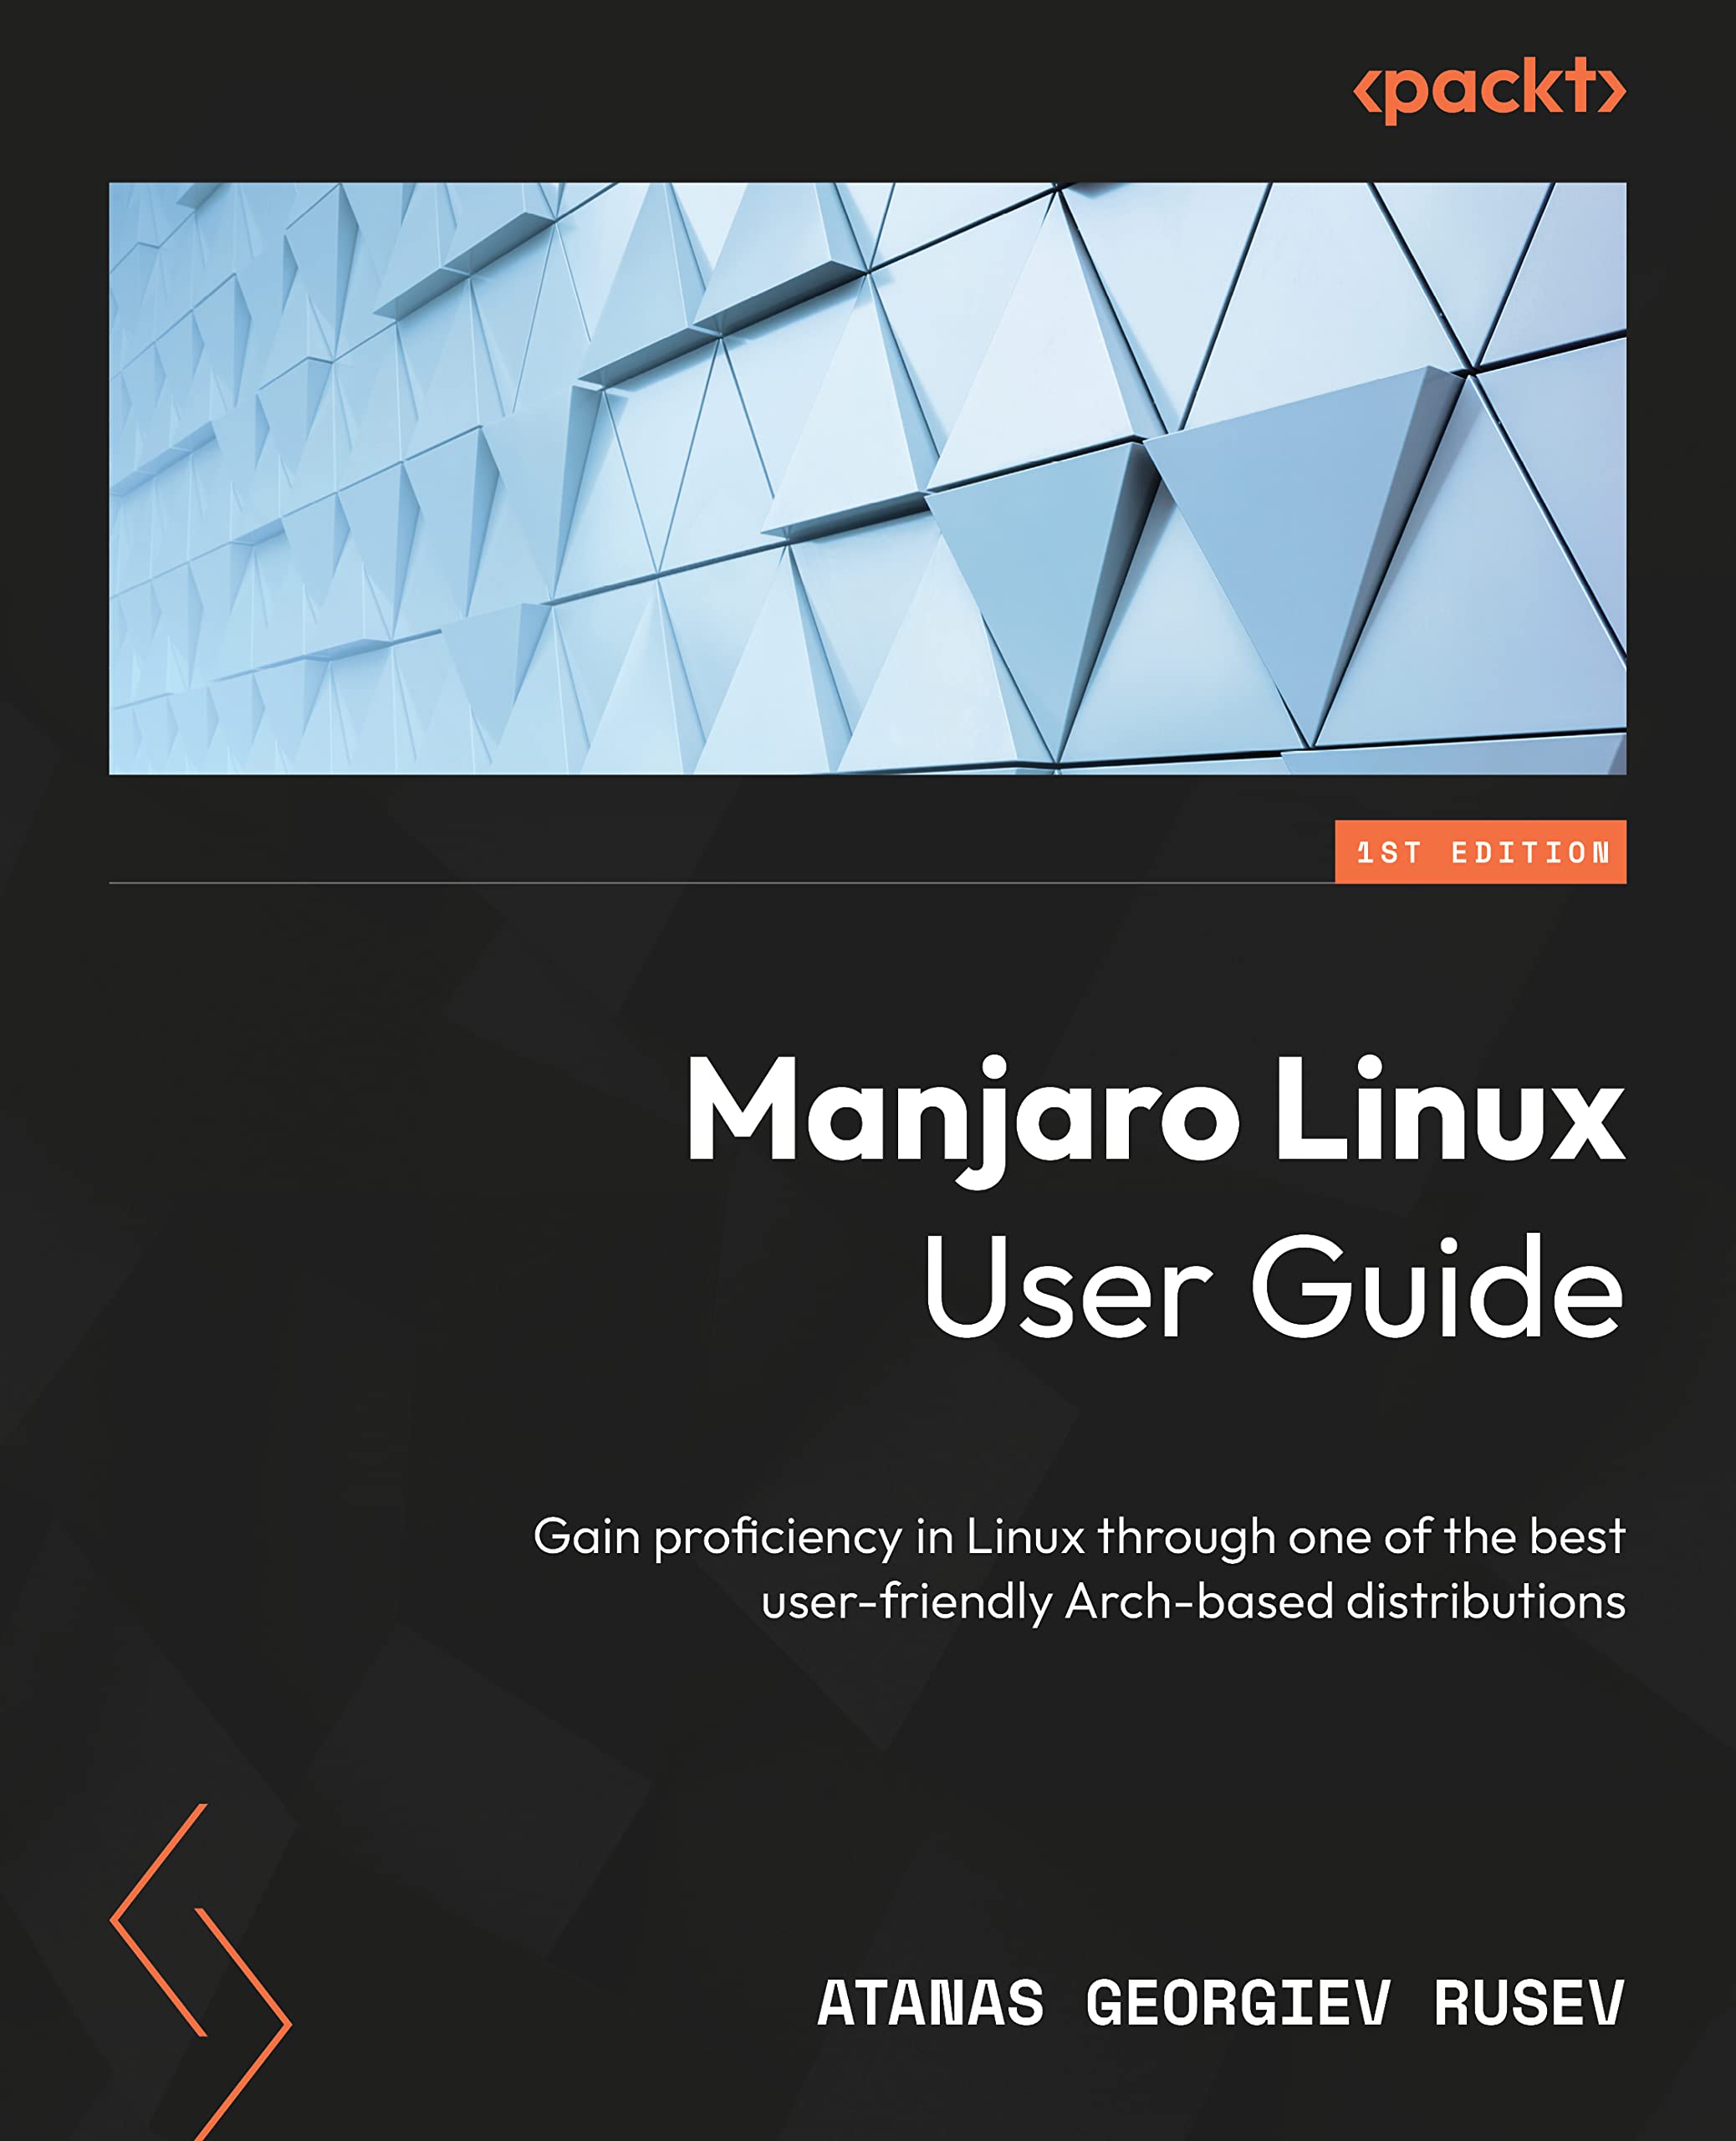 Manjaro Linux User Guide: Gain proficiency in Linux through one of the best user-friendly Arch-based distributions